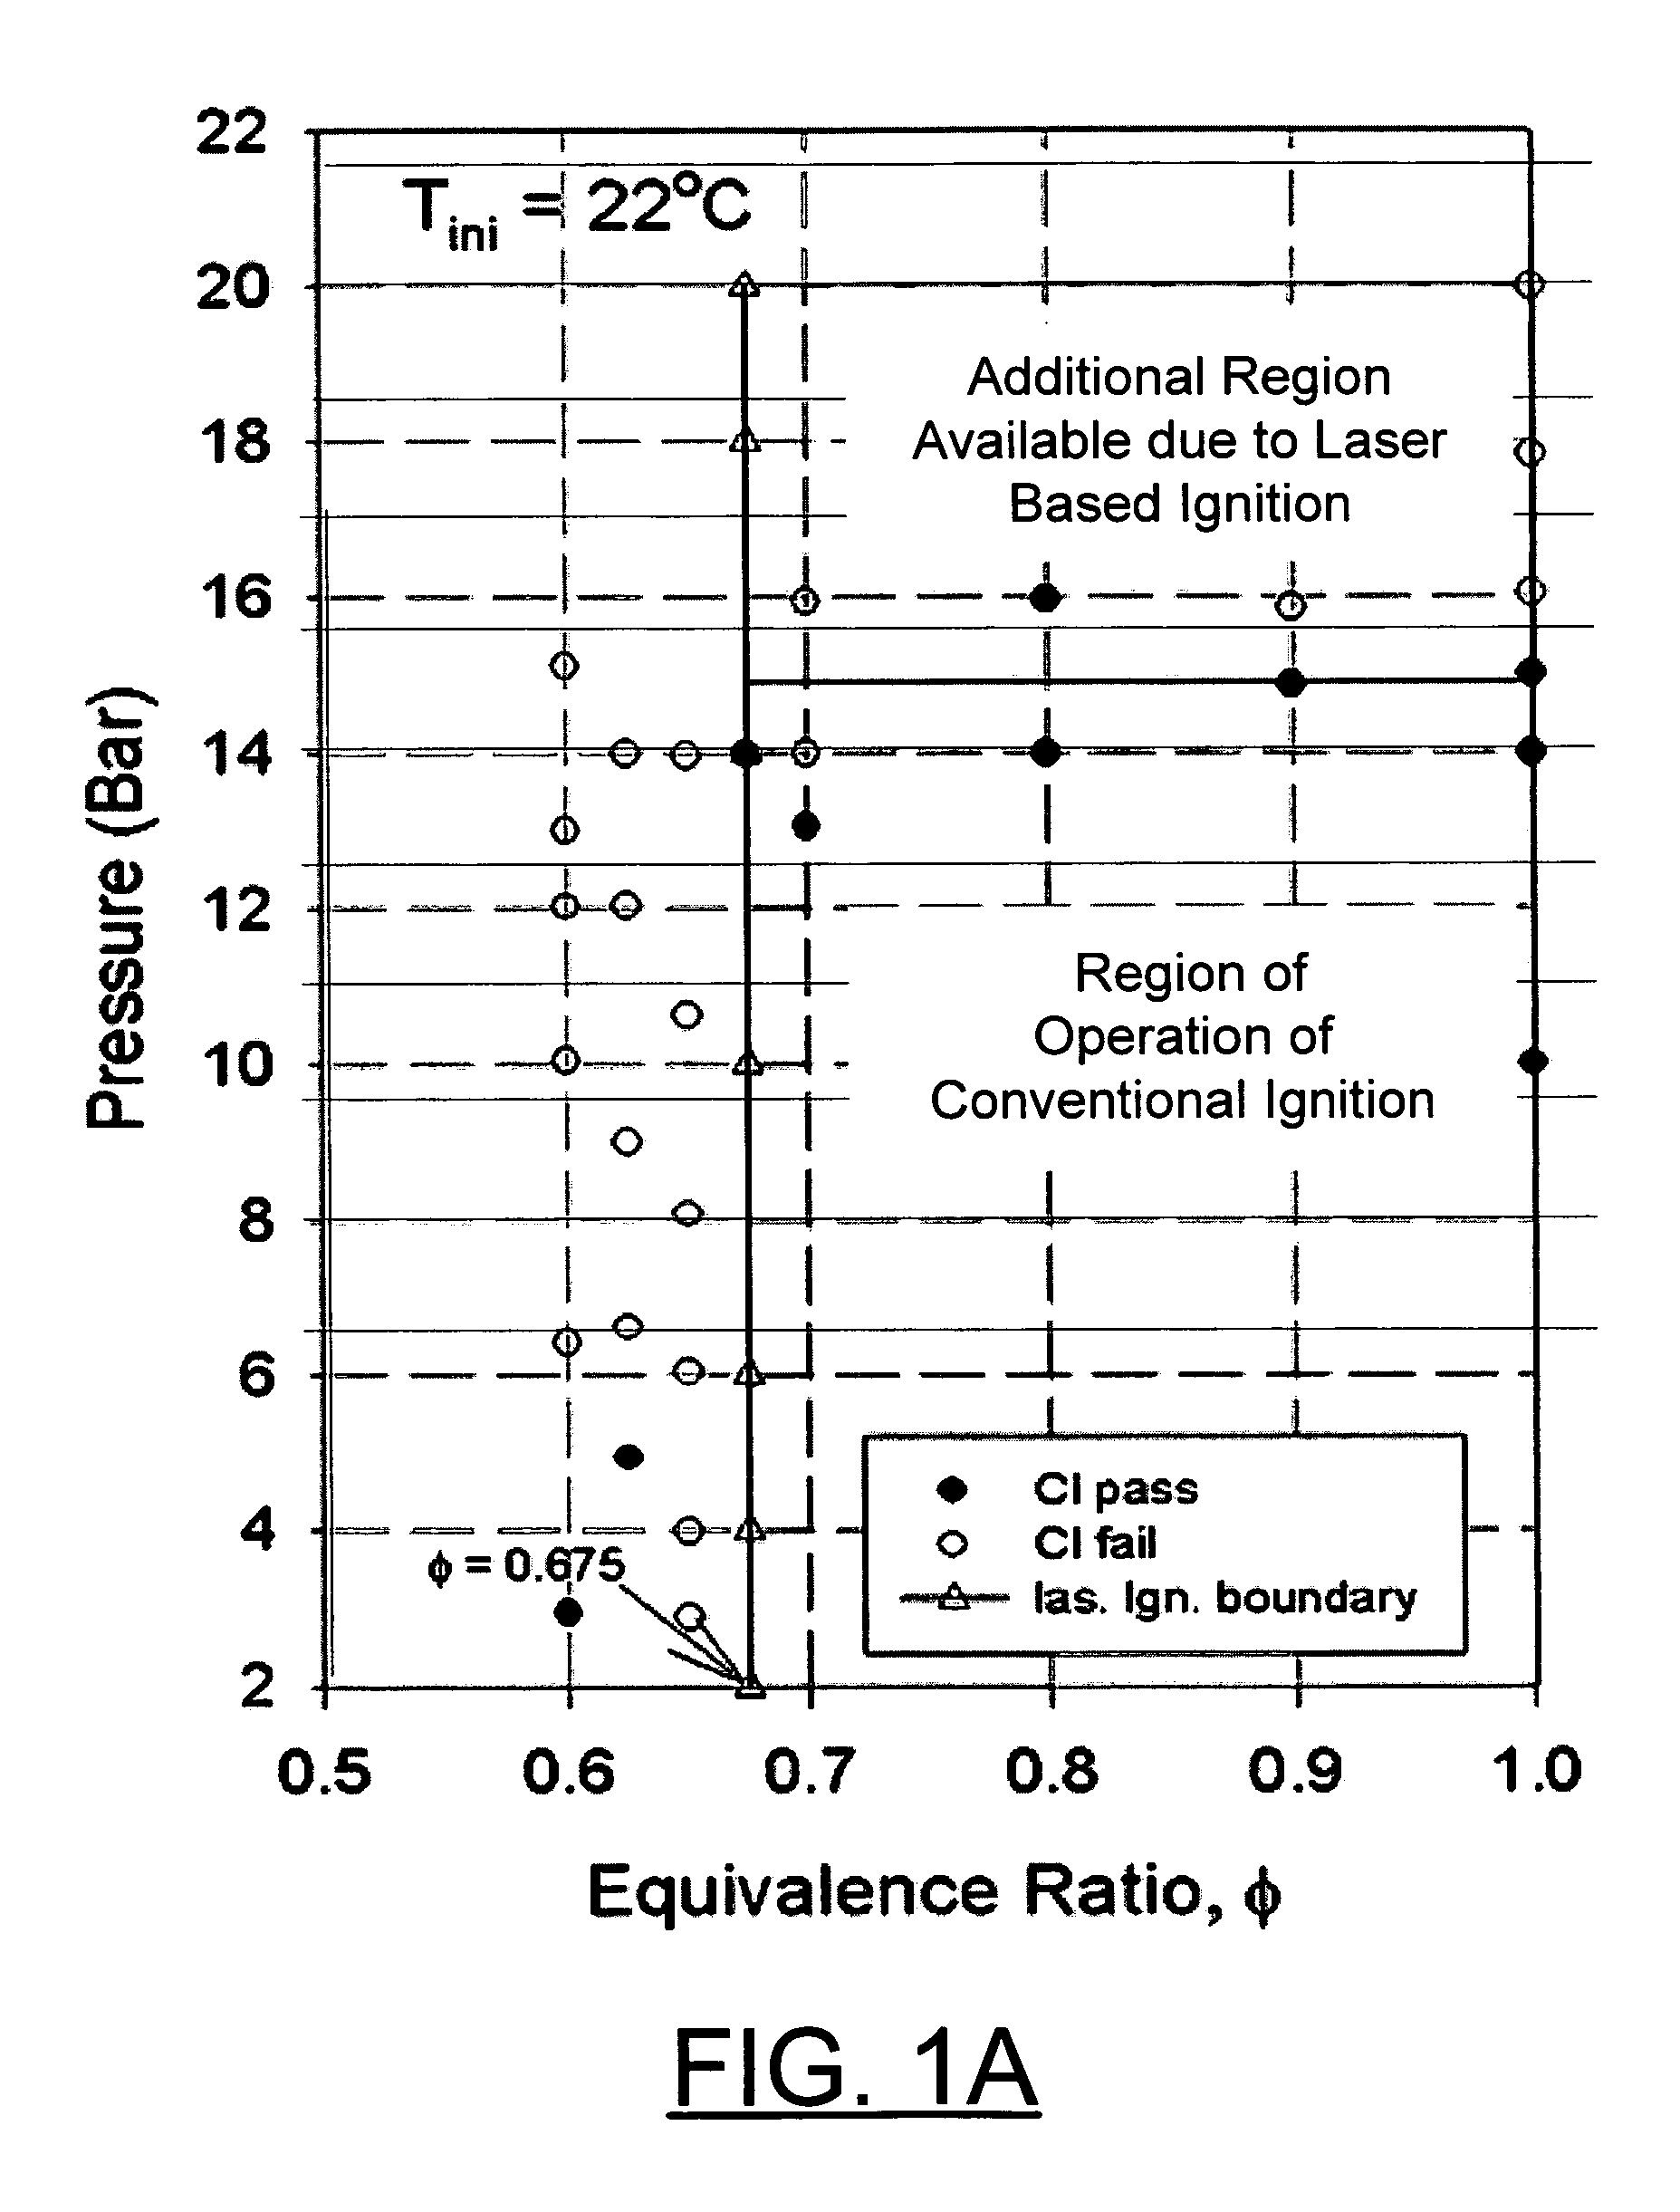 Laser based ignition system for natural gas reciprocating engines, laser based ignition system having capability to detect successful ignition event; and distributor system for use with high-powered pulsed lasers